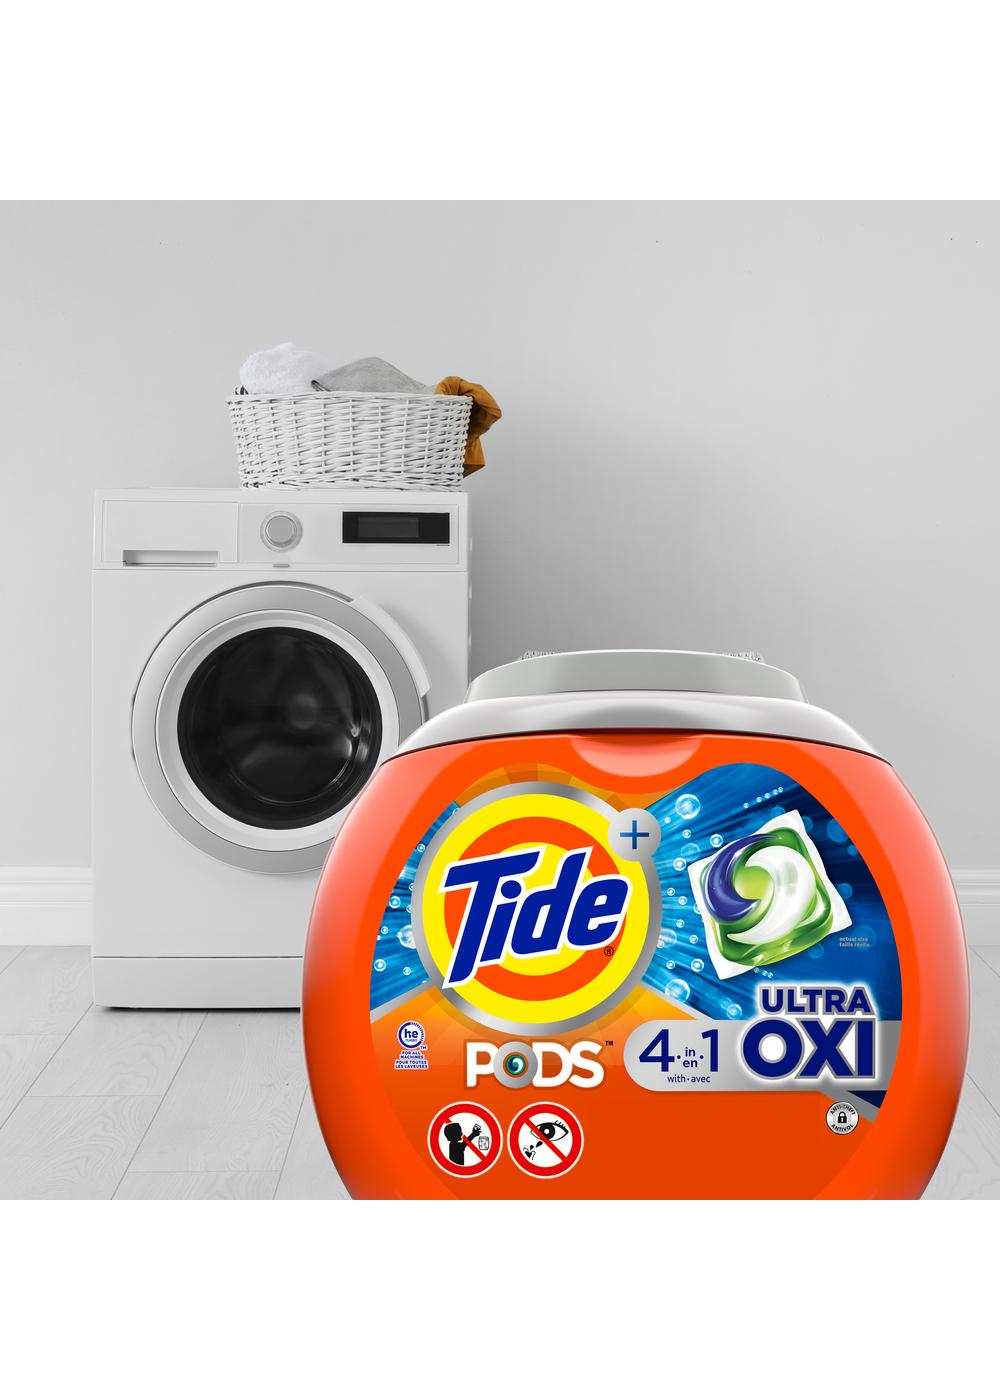 Tide PODS Ultra OXI Laundry HE Detergent Pacs; image 6 of 8